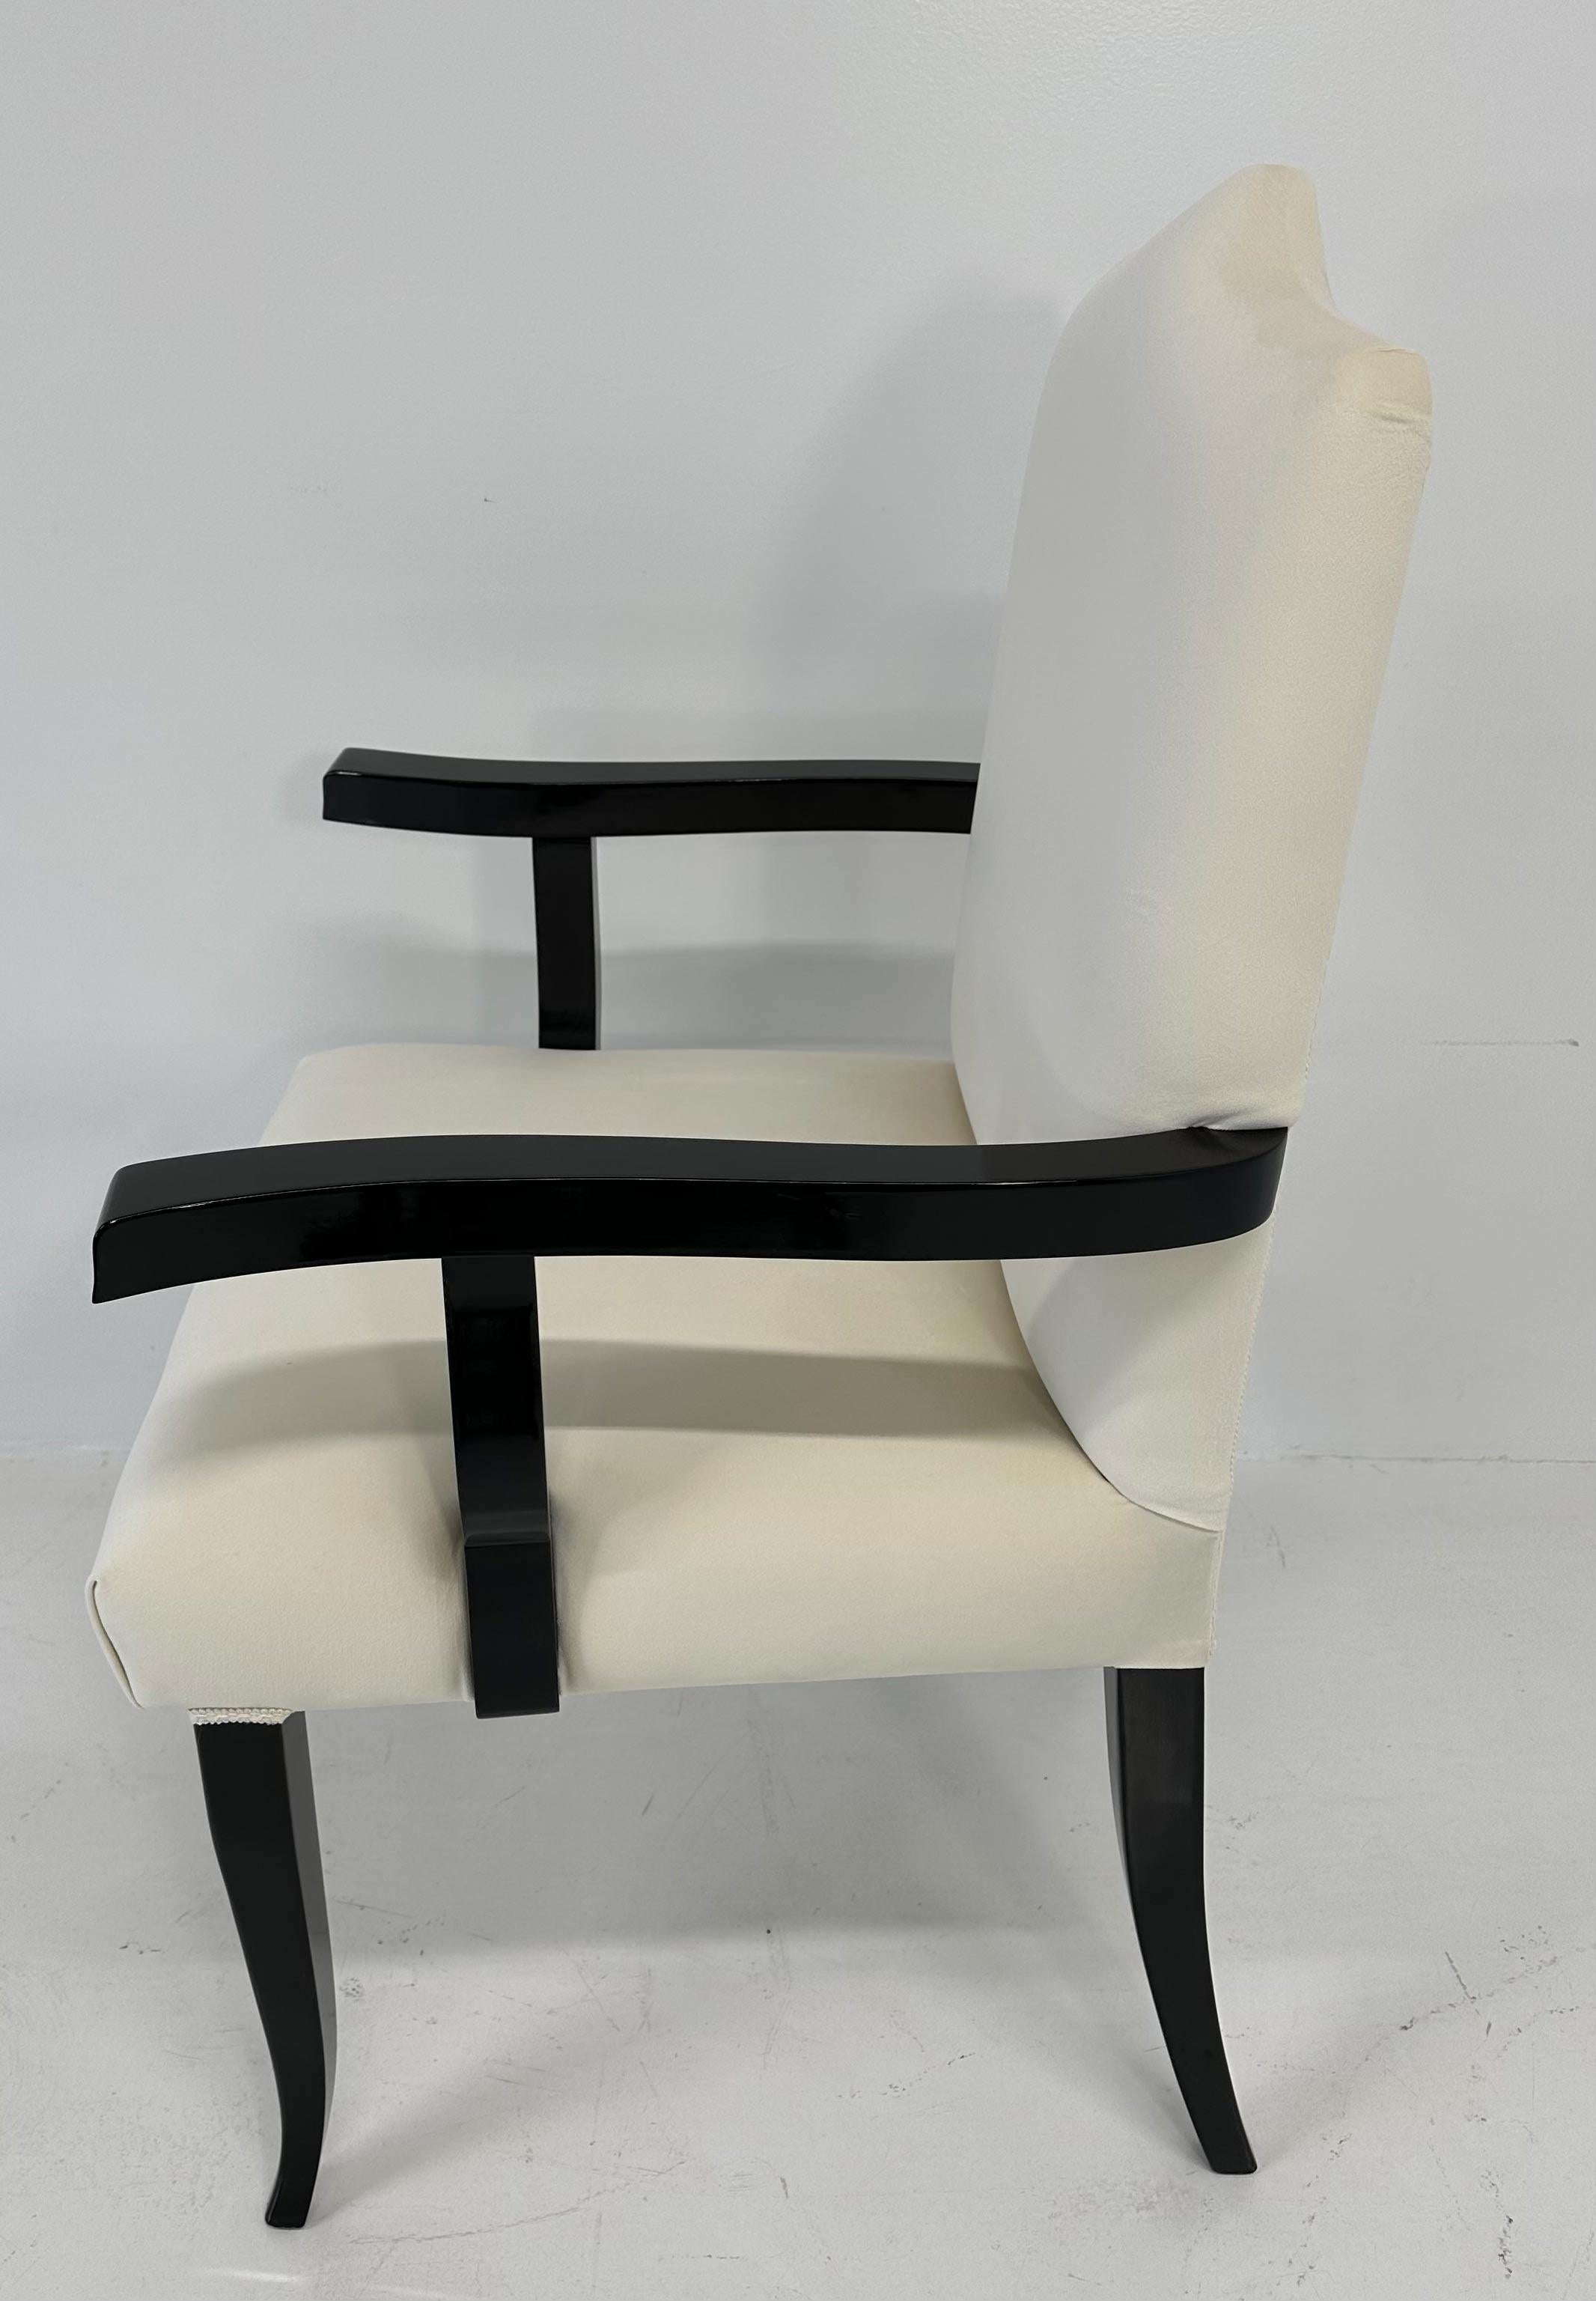 Italian Art Deco Style Set of 16 Cream Velvet and Black Lacquered Chairs For Sale 2